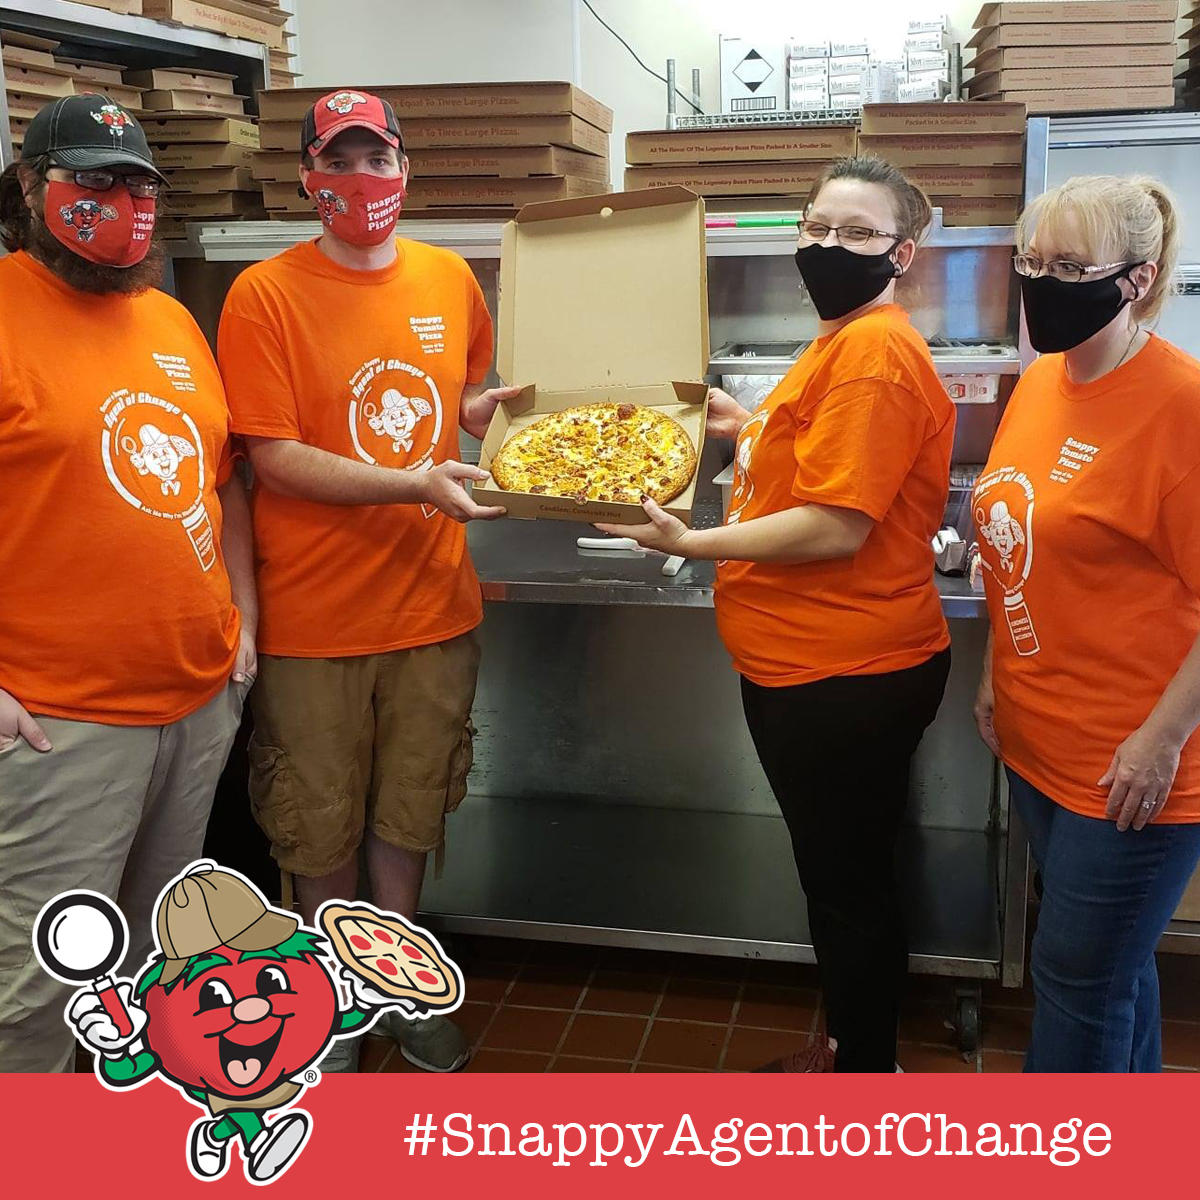 Agent of Change - Unity Pizza 2020
Snappy Tomato Pizza - Corporate Offices - Call 859.525.4680 - Online Menu - Carryout and Delivery
"Add Cheddar and Make It Better!"